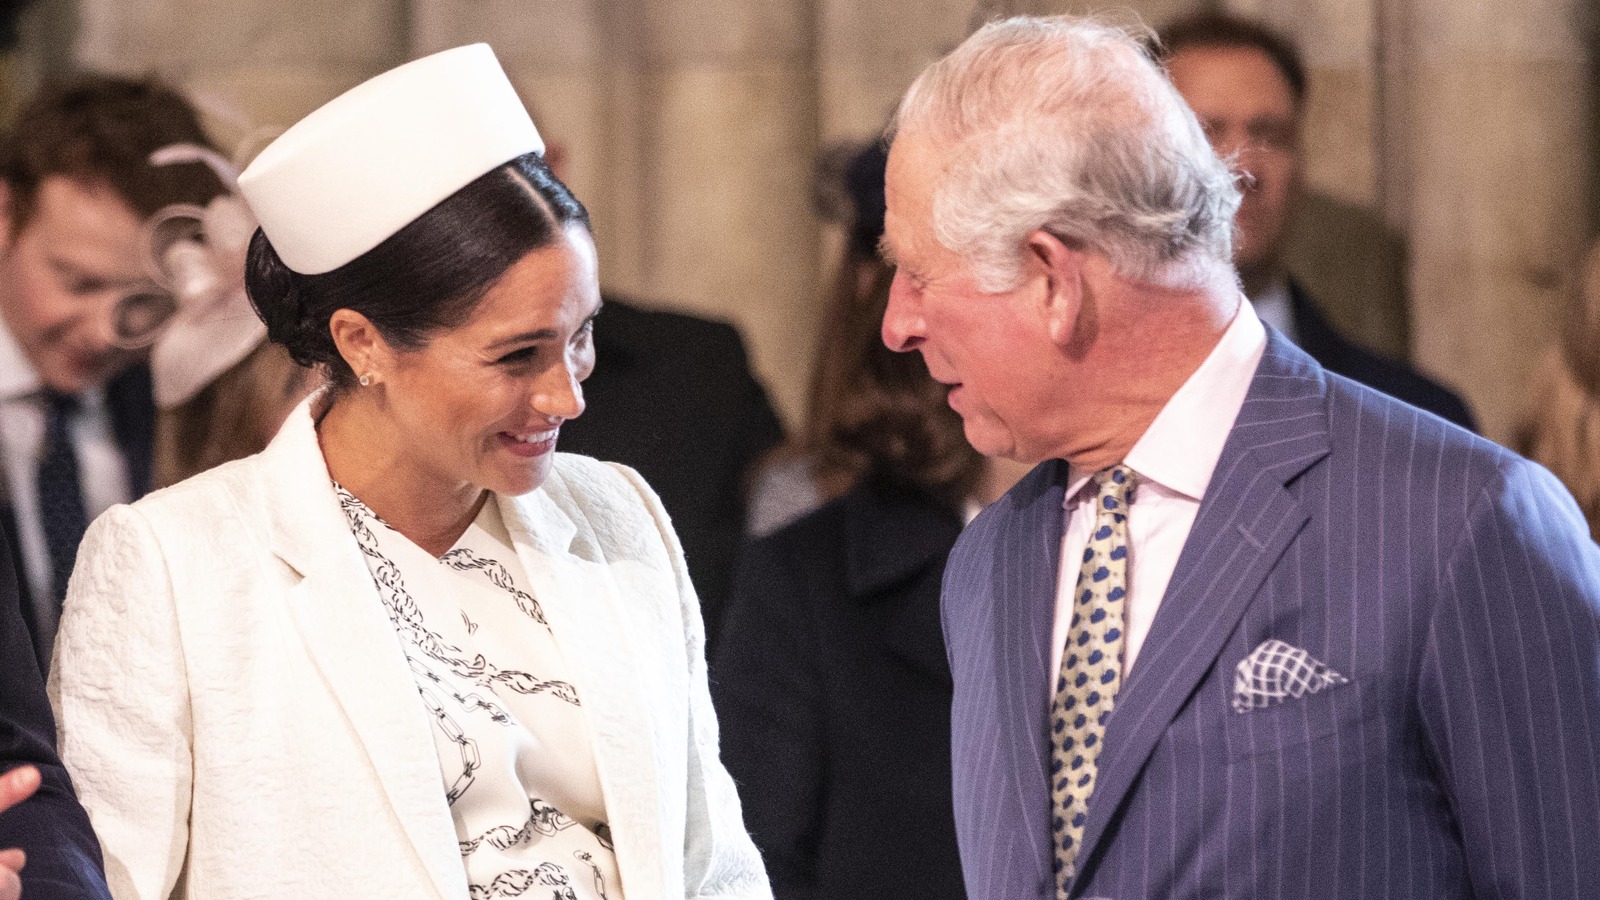 Meghan Markle Offers Delicate Signal She's Prepared To Reconcile With King Charles